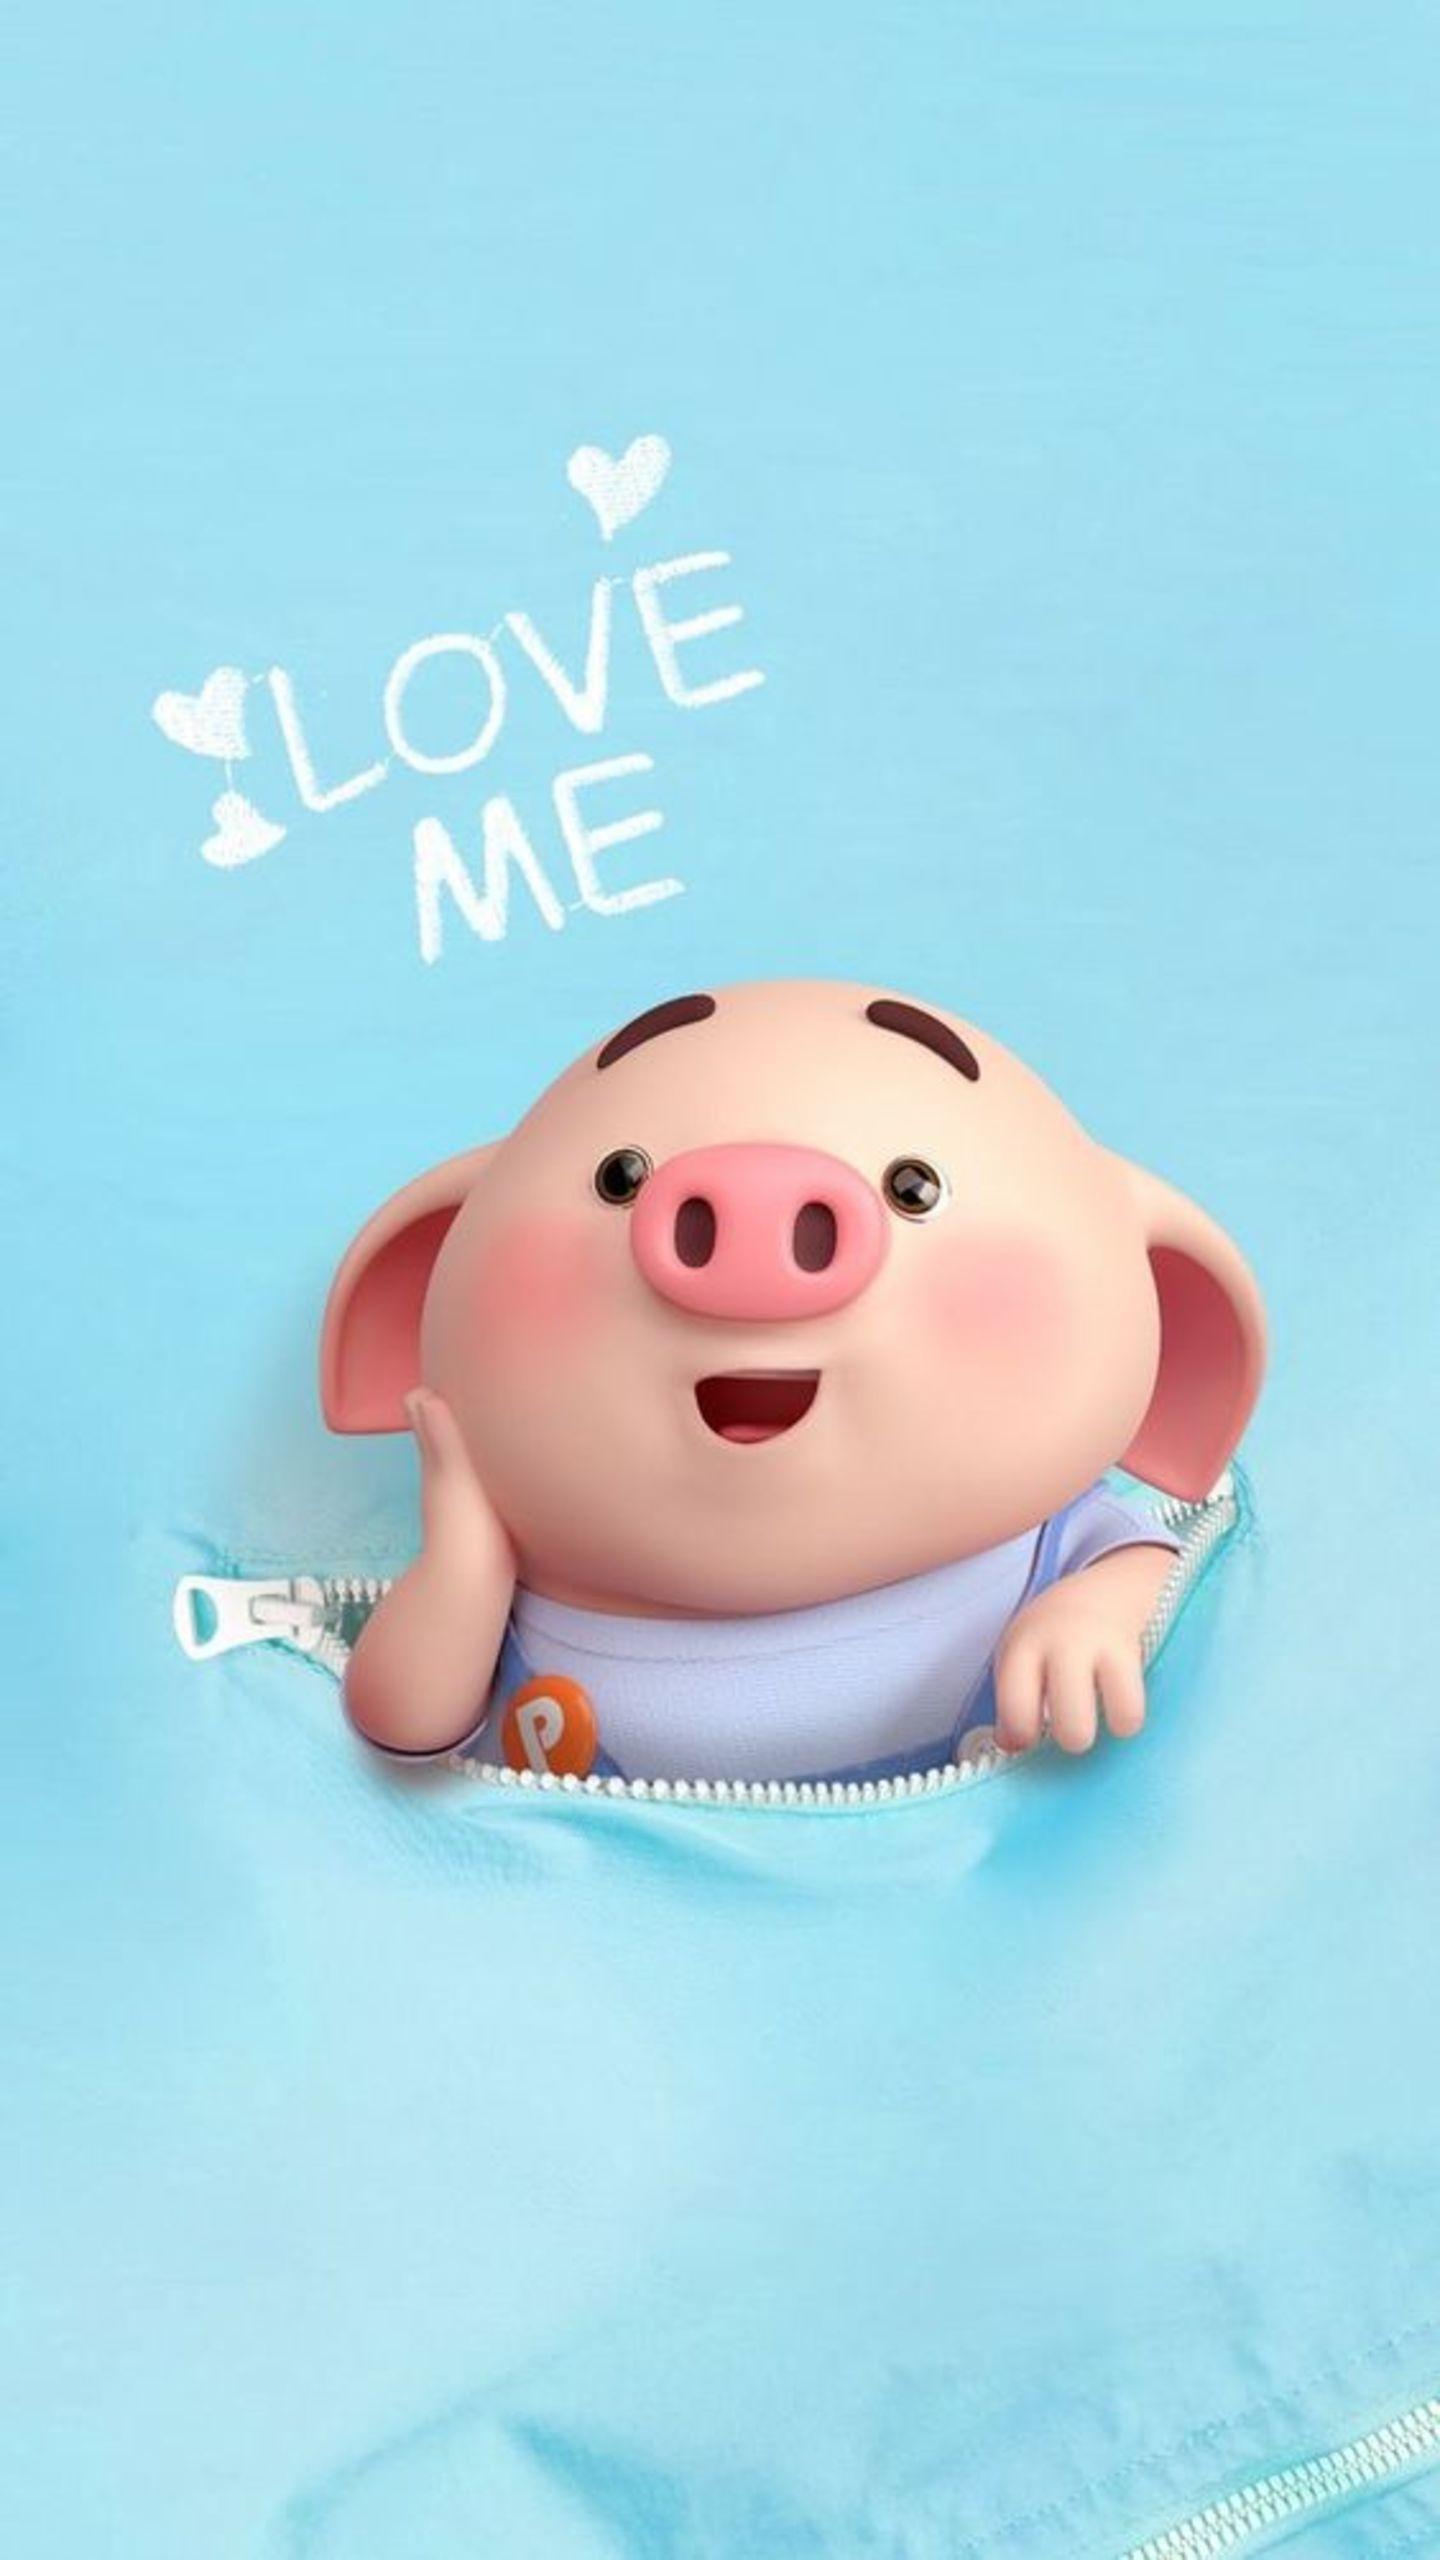 Cute Piggy Wallpapers for Android - APK ...